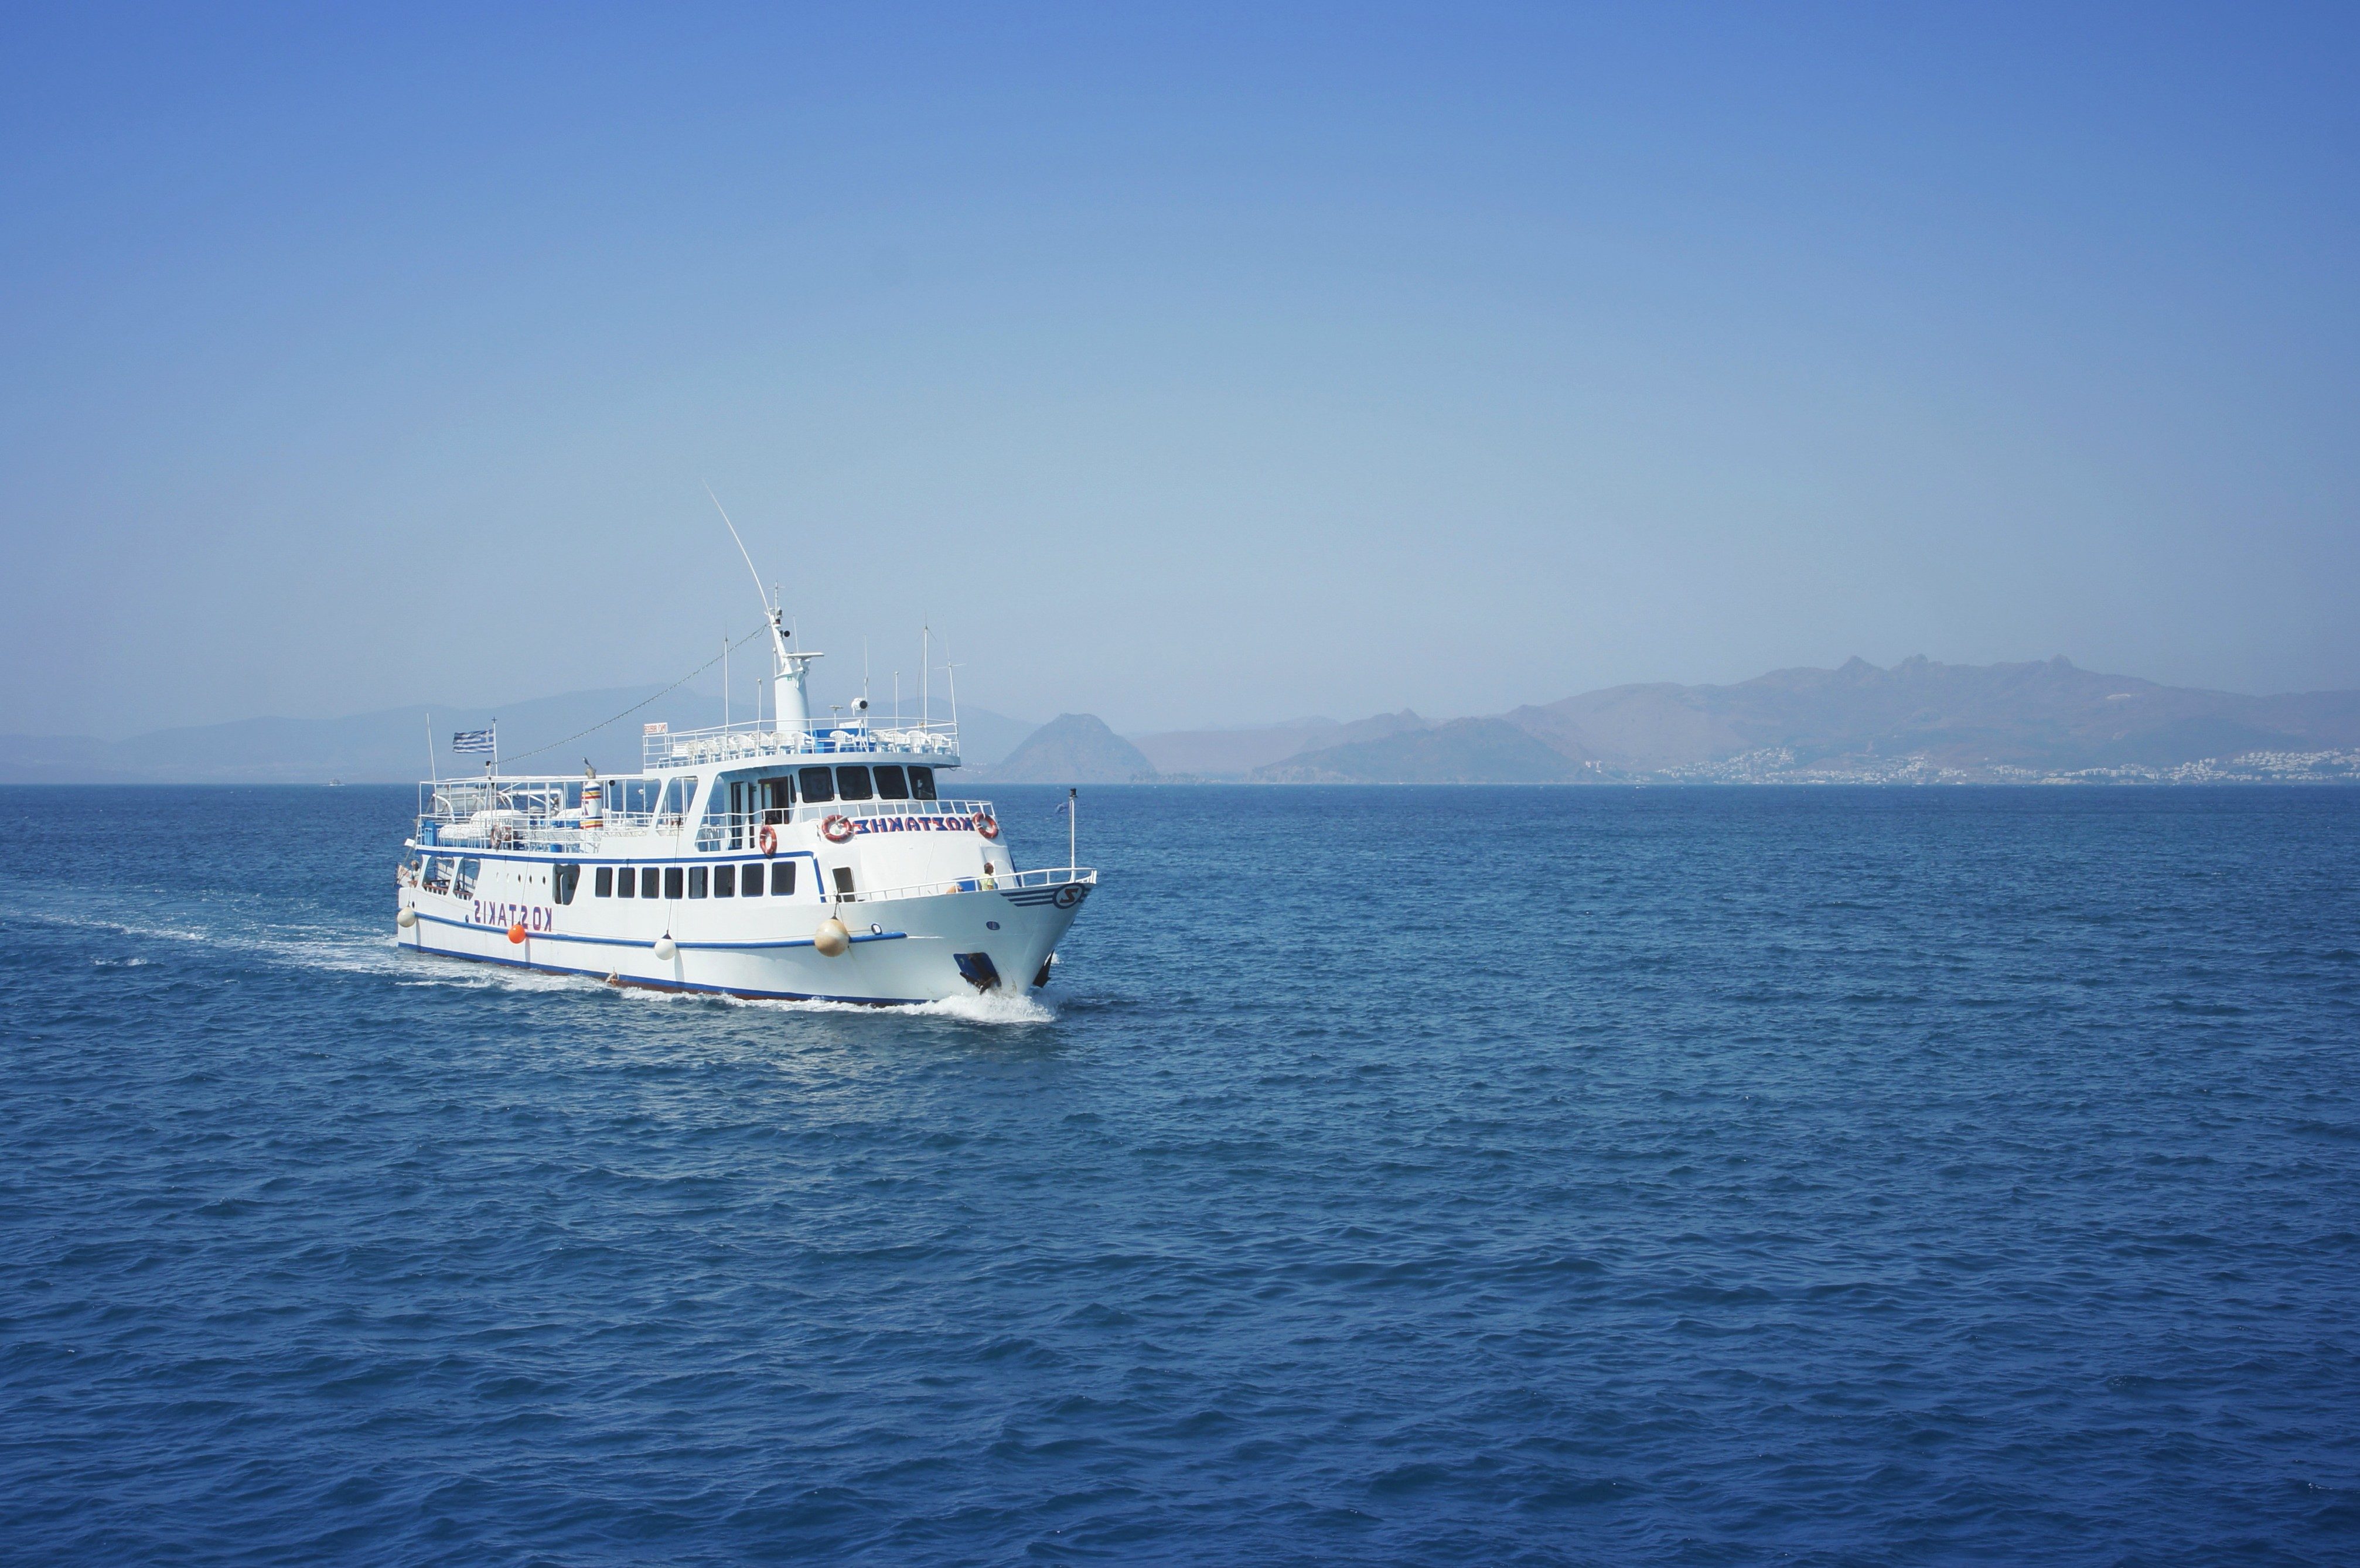 Free picture: Greece, ship, passenger boat, ferry boat, sea, travel ...